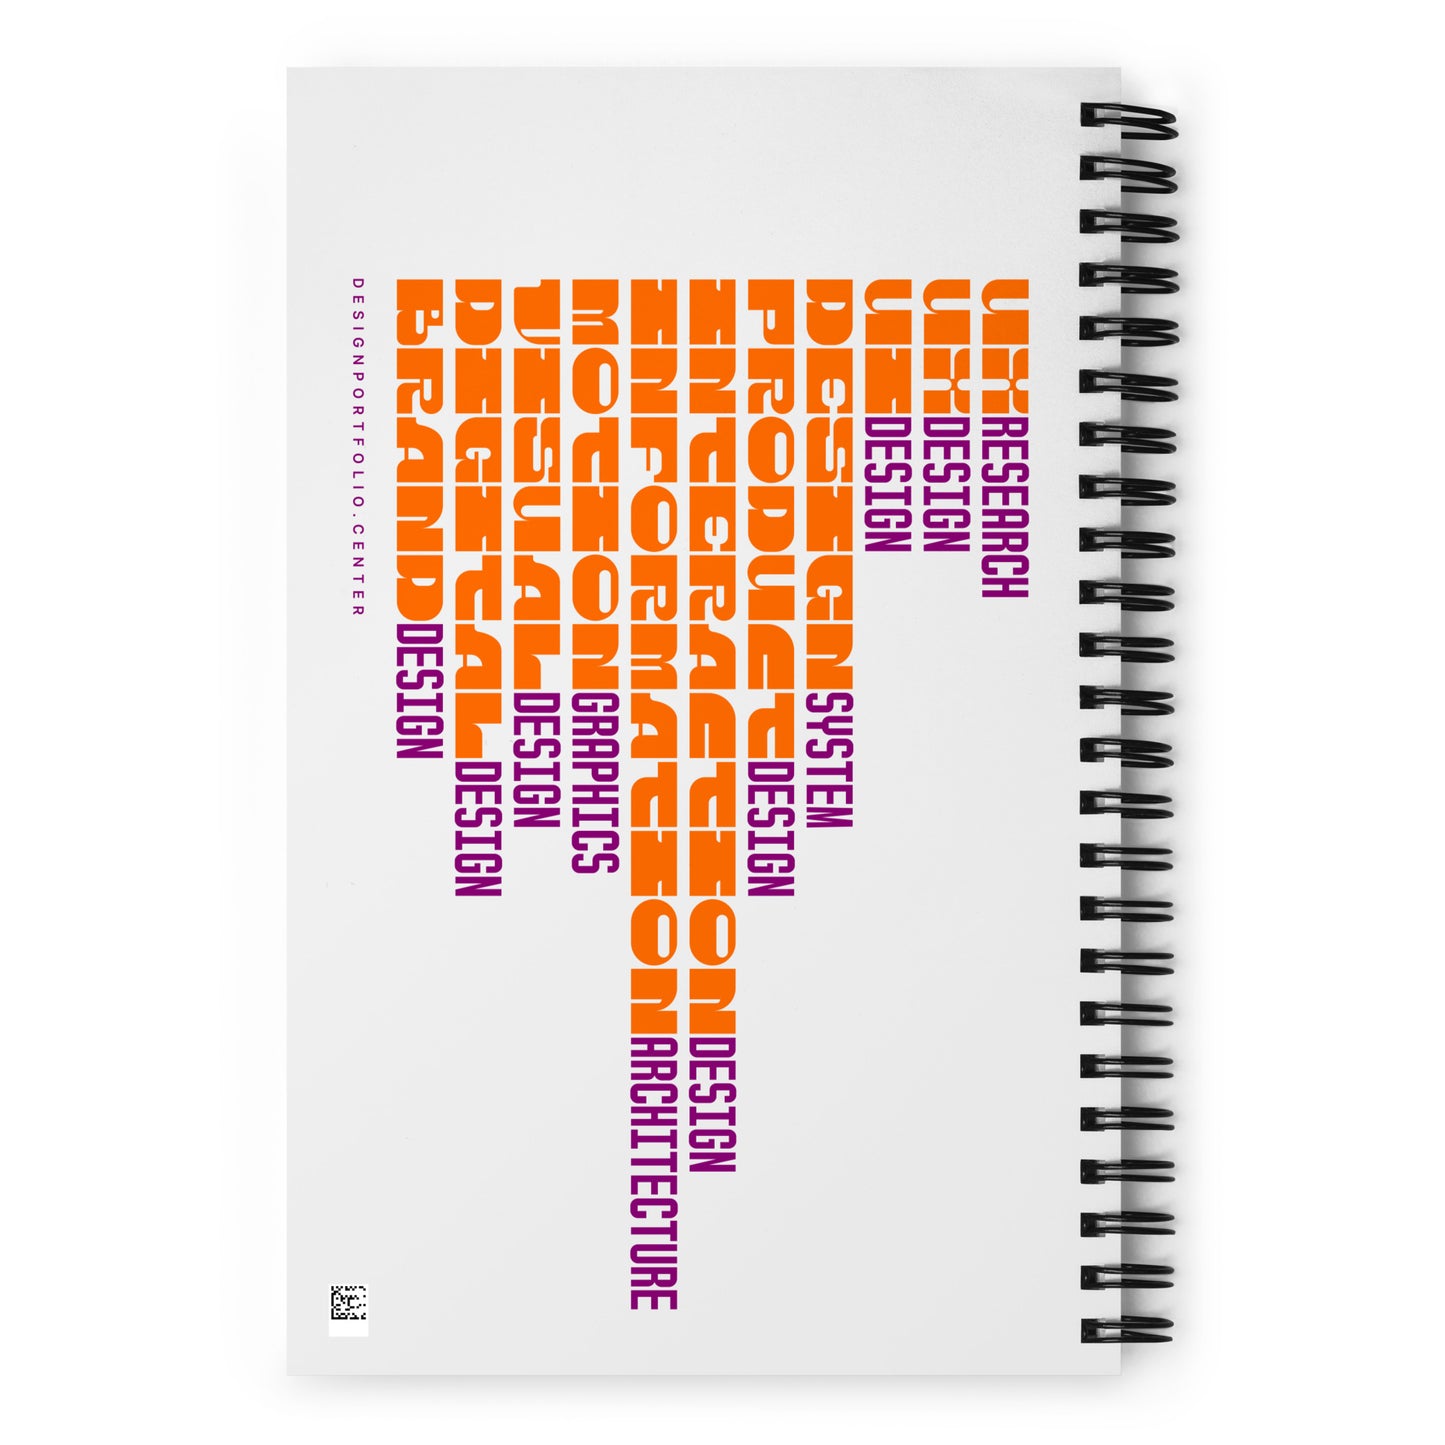 Back cover of a notebook showing design career tracks.